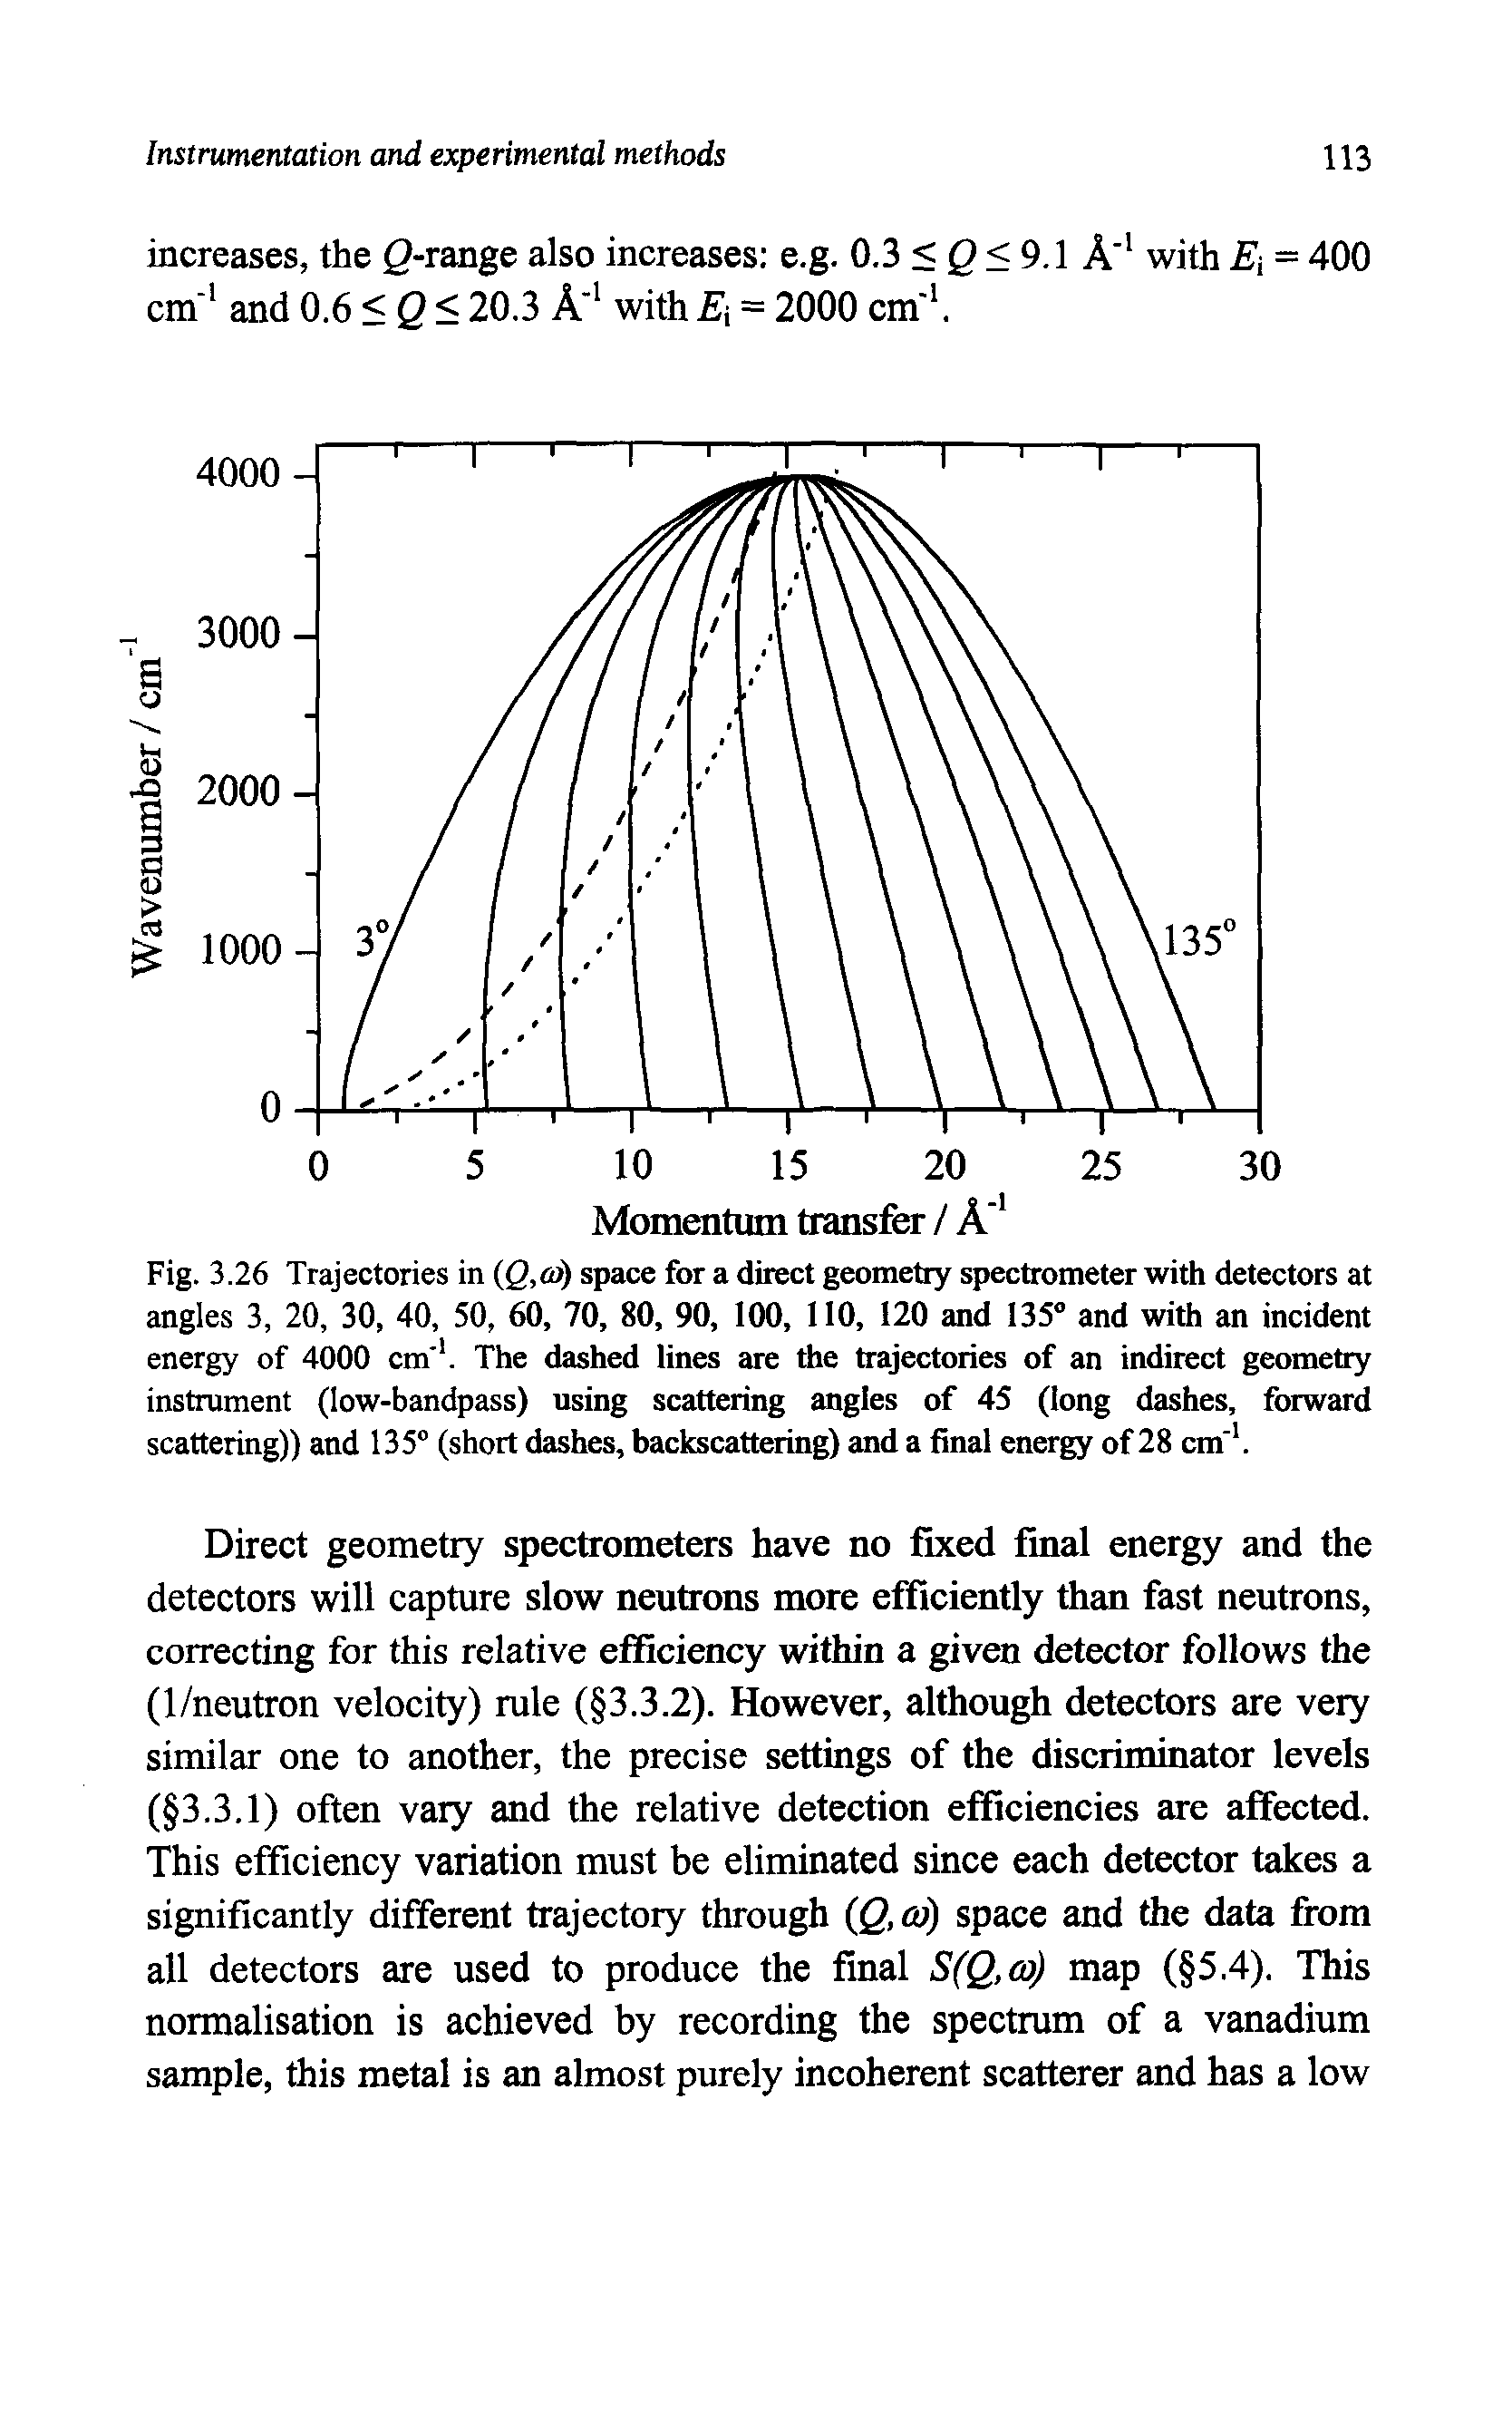 Fig. 3.26 Trajectories in (Q,a>) space for a direct geometry spectrometer with detectors at angles 3, 20, 30, 40, 50, 60, 70, 80, 90, 100, 110, 120 and 135° and with an incident energy of 4000 cm. The dashed lines are the trajectories of an indirect geometry instrument (low-bandpass) using scattering angles of 45 (long dashes, forward scattering)) and 135° (short dashes, backscattering) and a final energy of 28 cm". ...